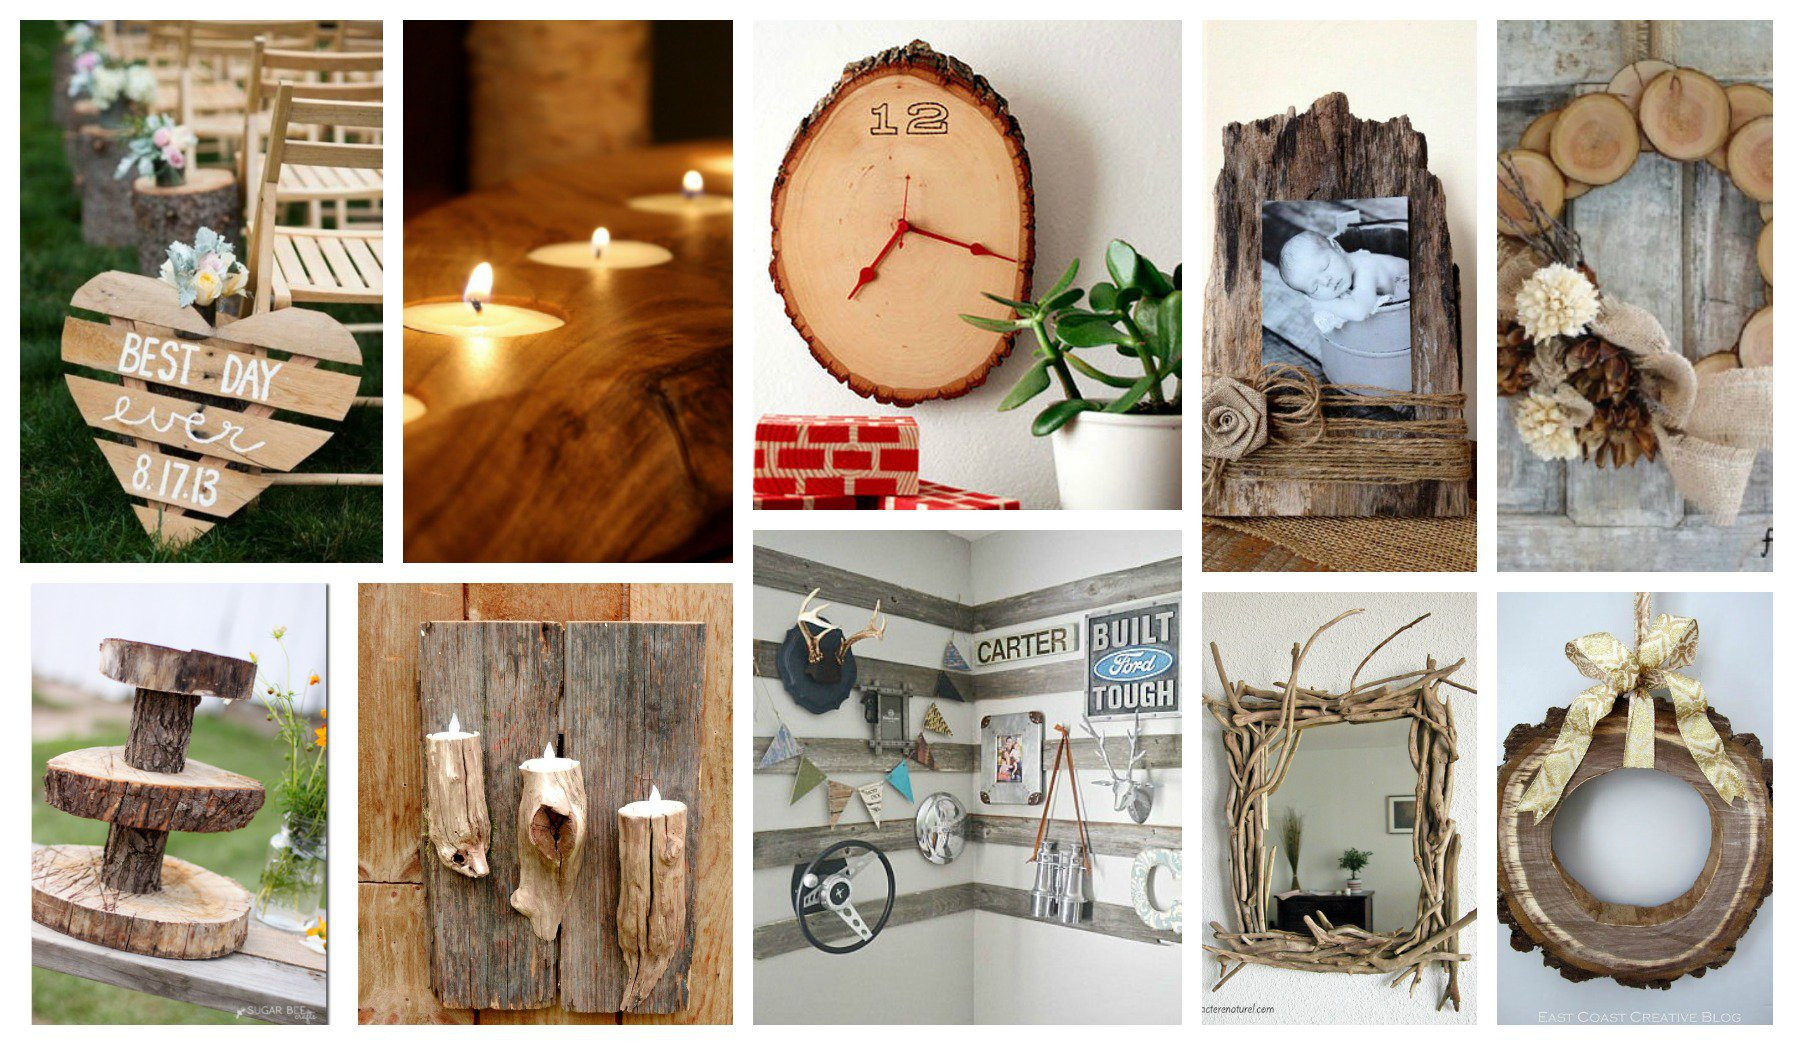 DIY Wooden Decorations
 Stupendous DIY Rustic Wood Decor That Will Make You Say